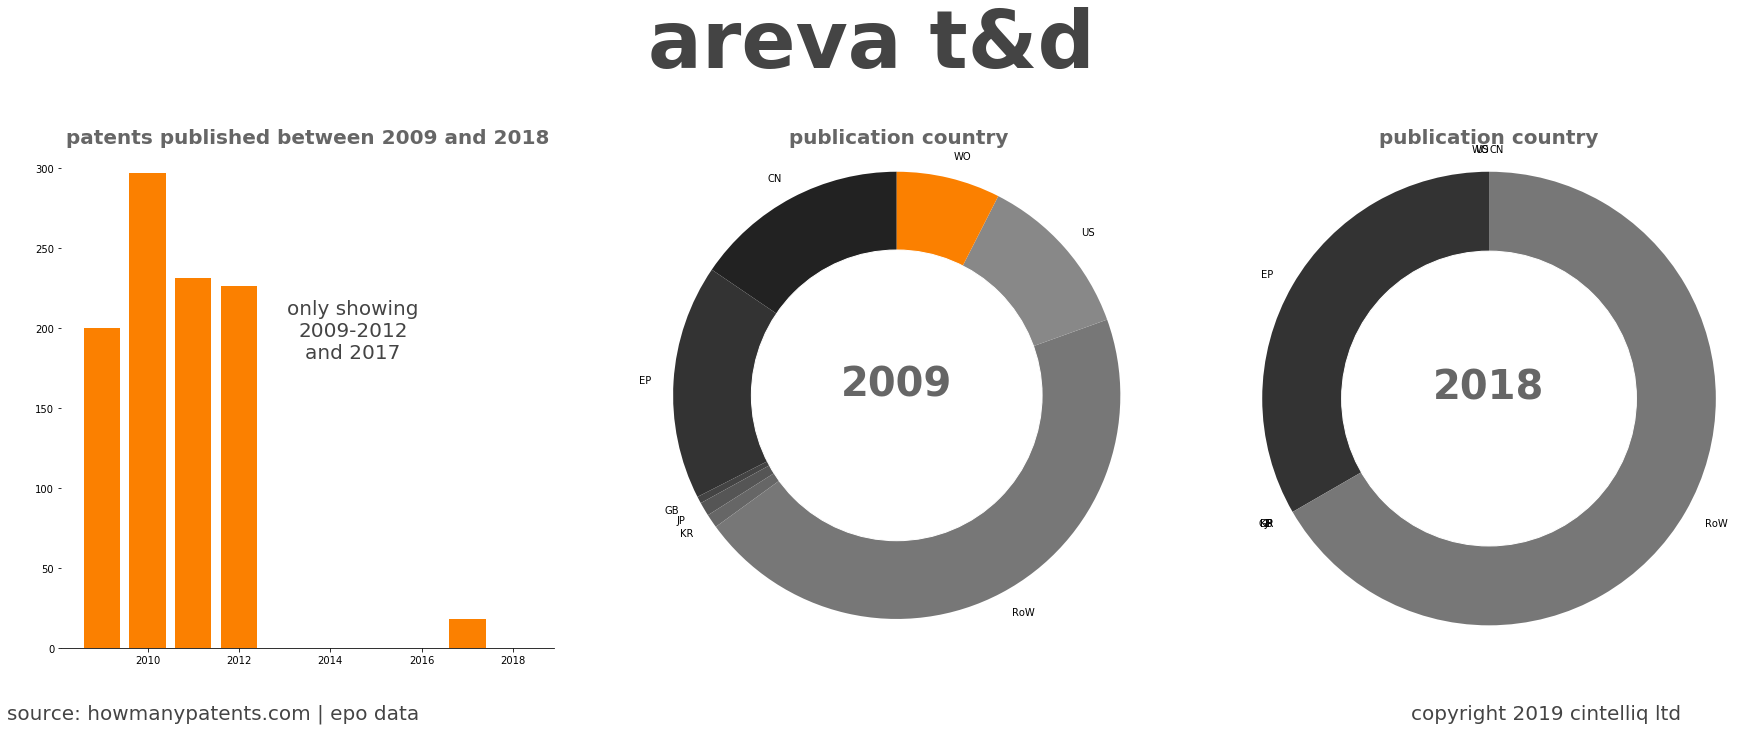 summary of patents for Areva T&D